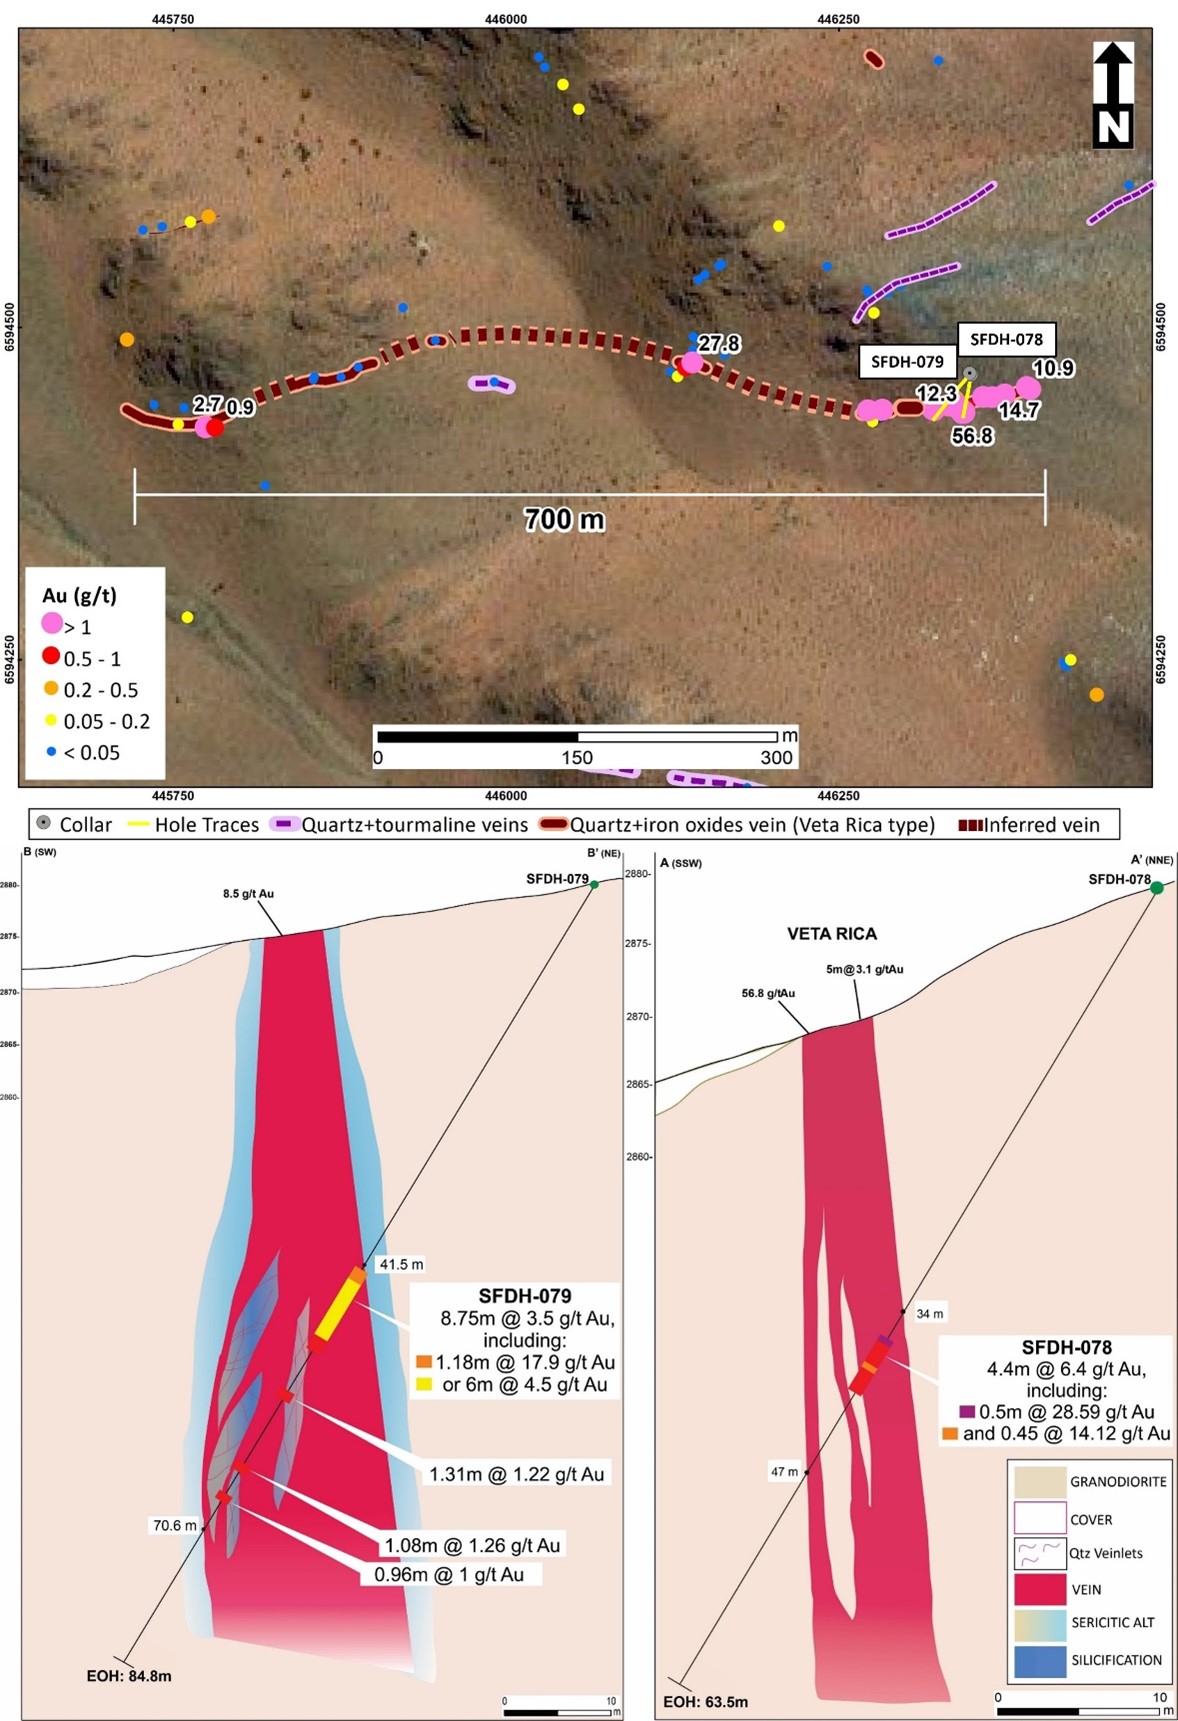 Veta Rica Surface map and sections showing drill holes and distribution of rock chip sampling of the Veta Rica vein.  Sampling 300 m west of the drill pads has returned grades of up to 27 g/t Au, while samples 700 m west of the drilling has returned grades of up to 2.7 g/t Au.